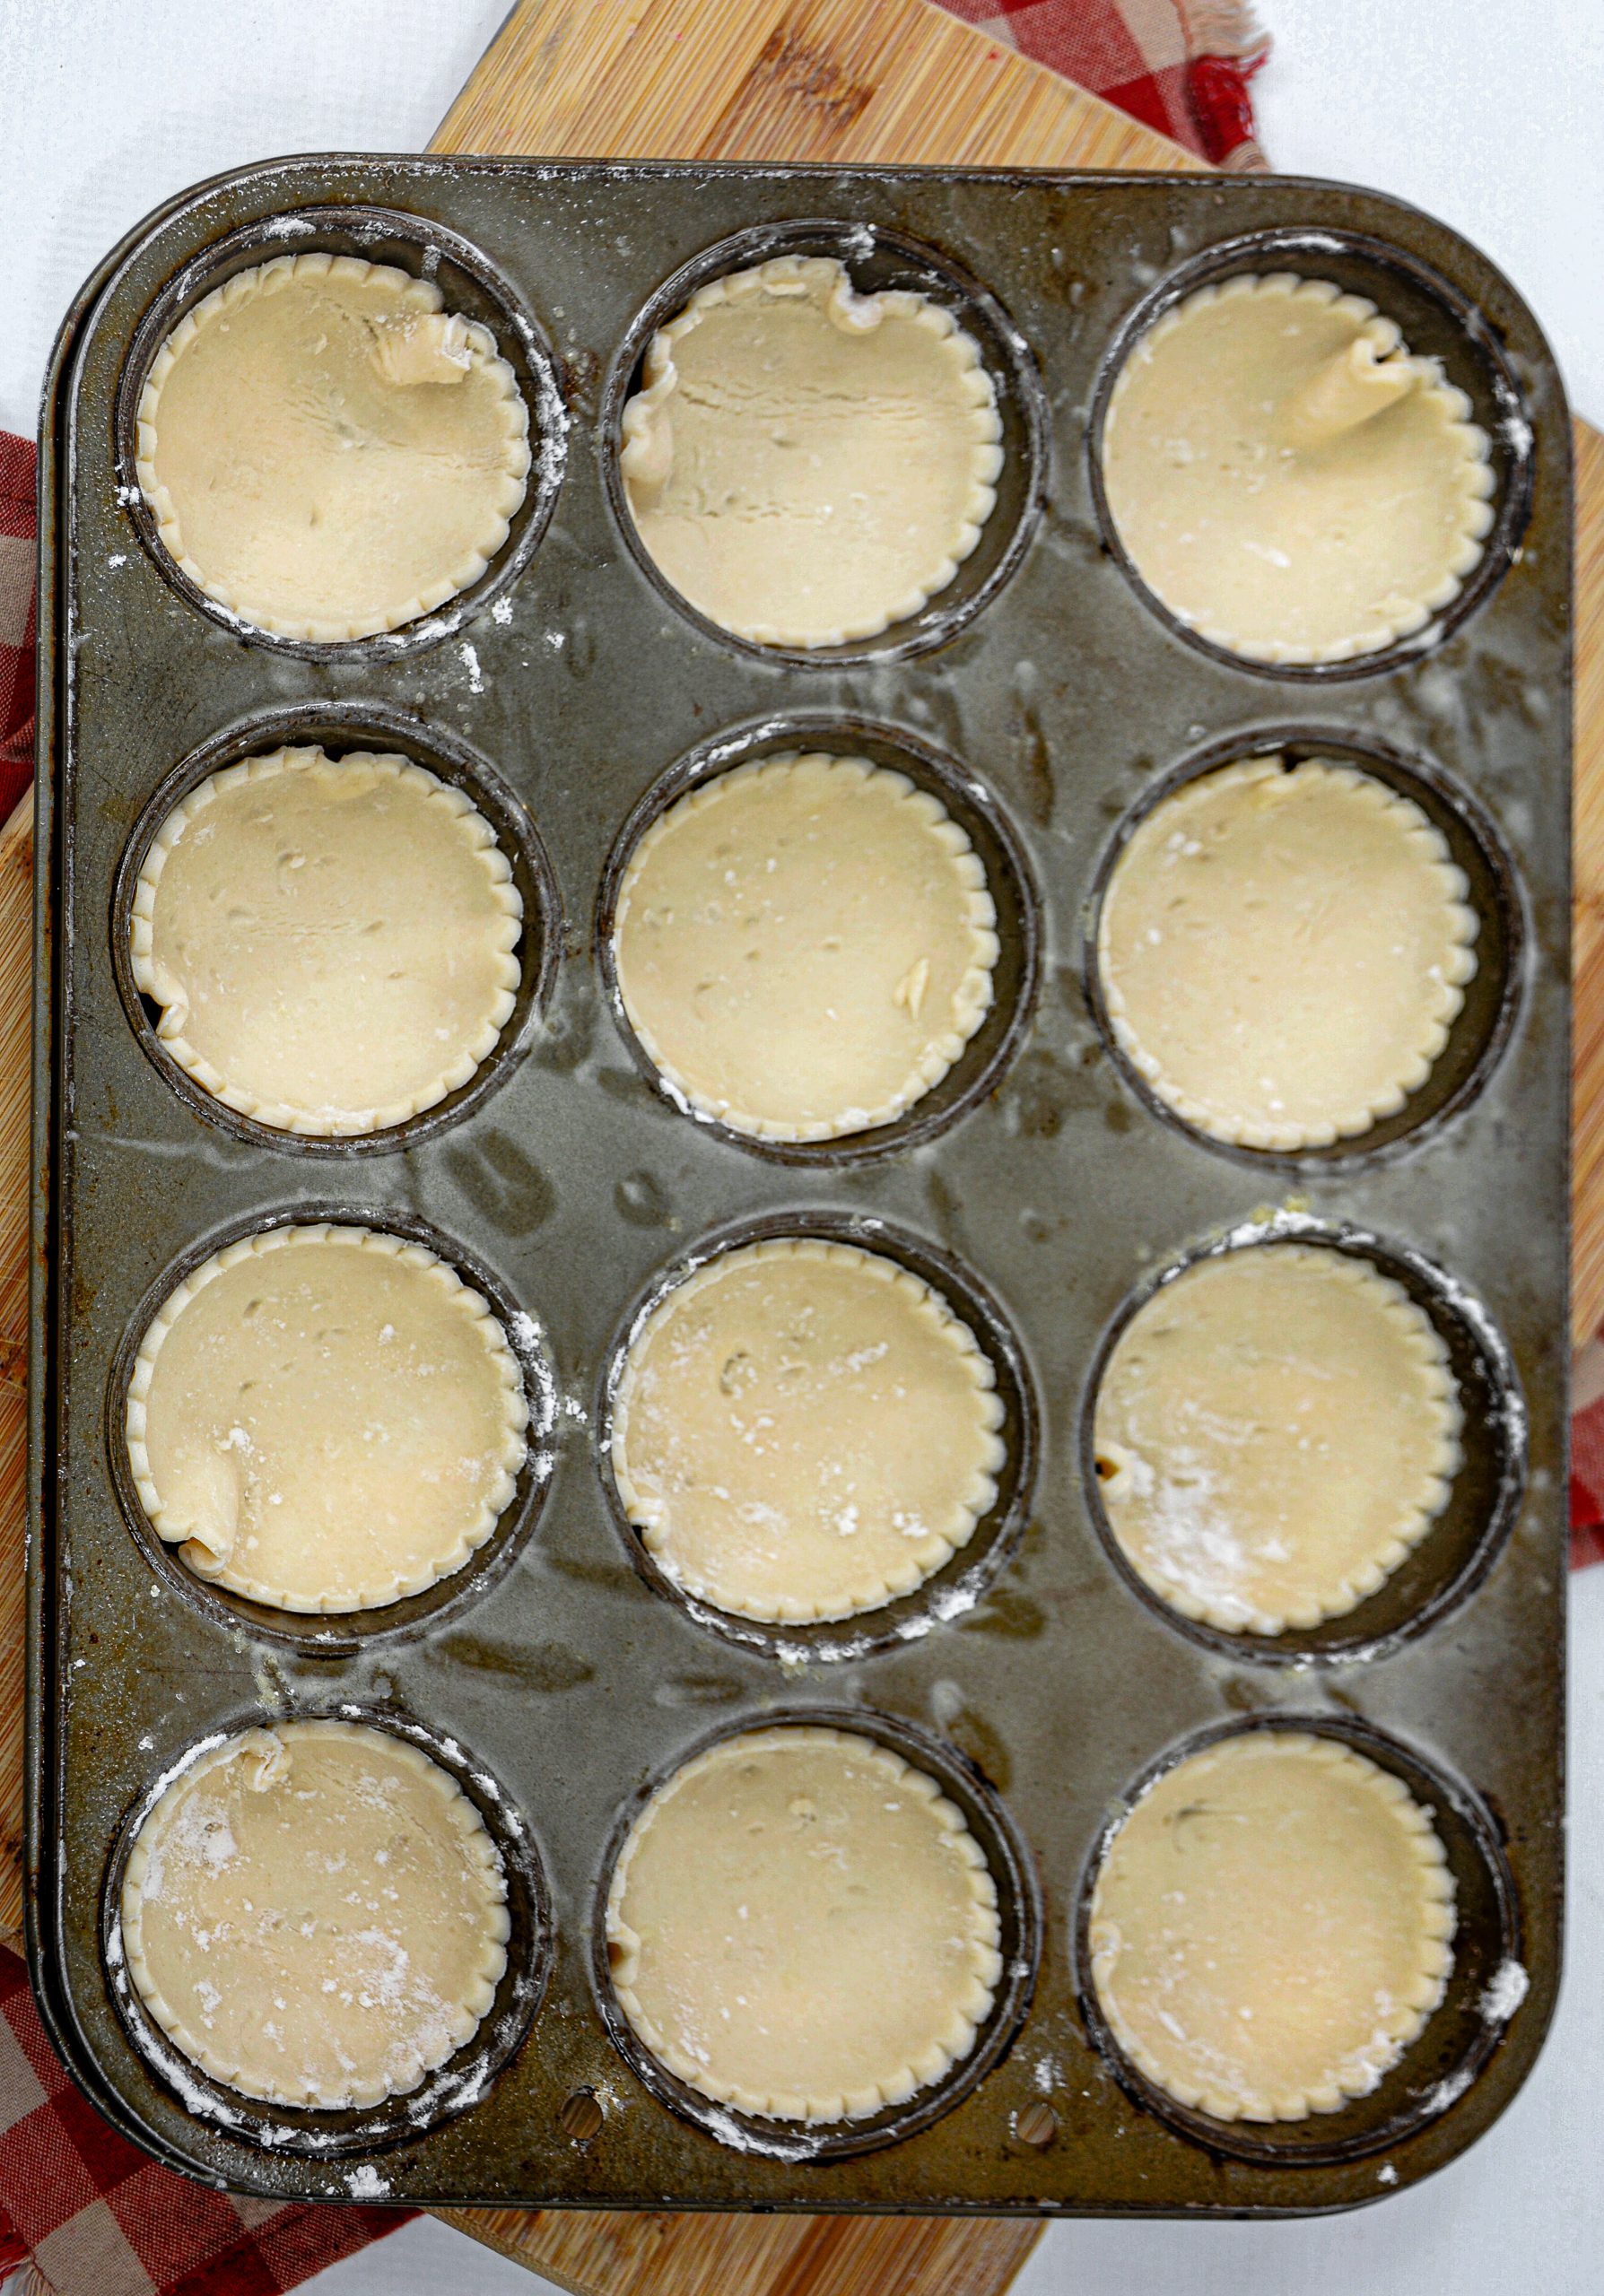 Second, use a straw to make six small holes in the top crust of each pot pie.